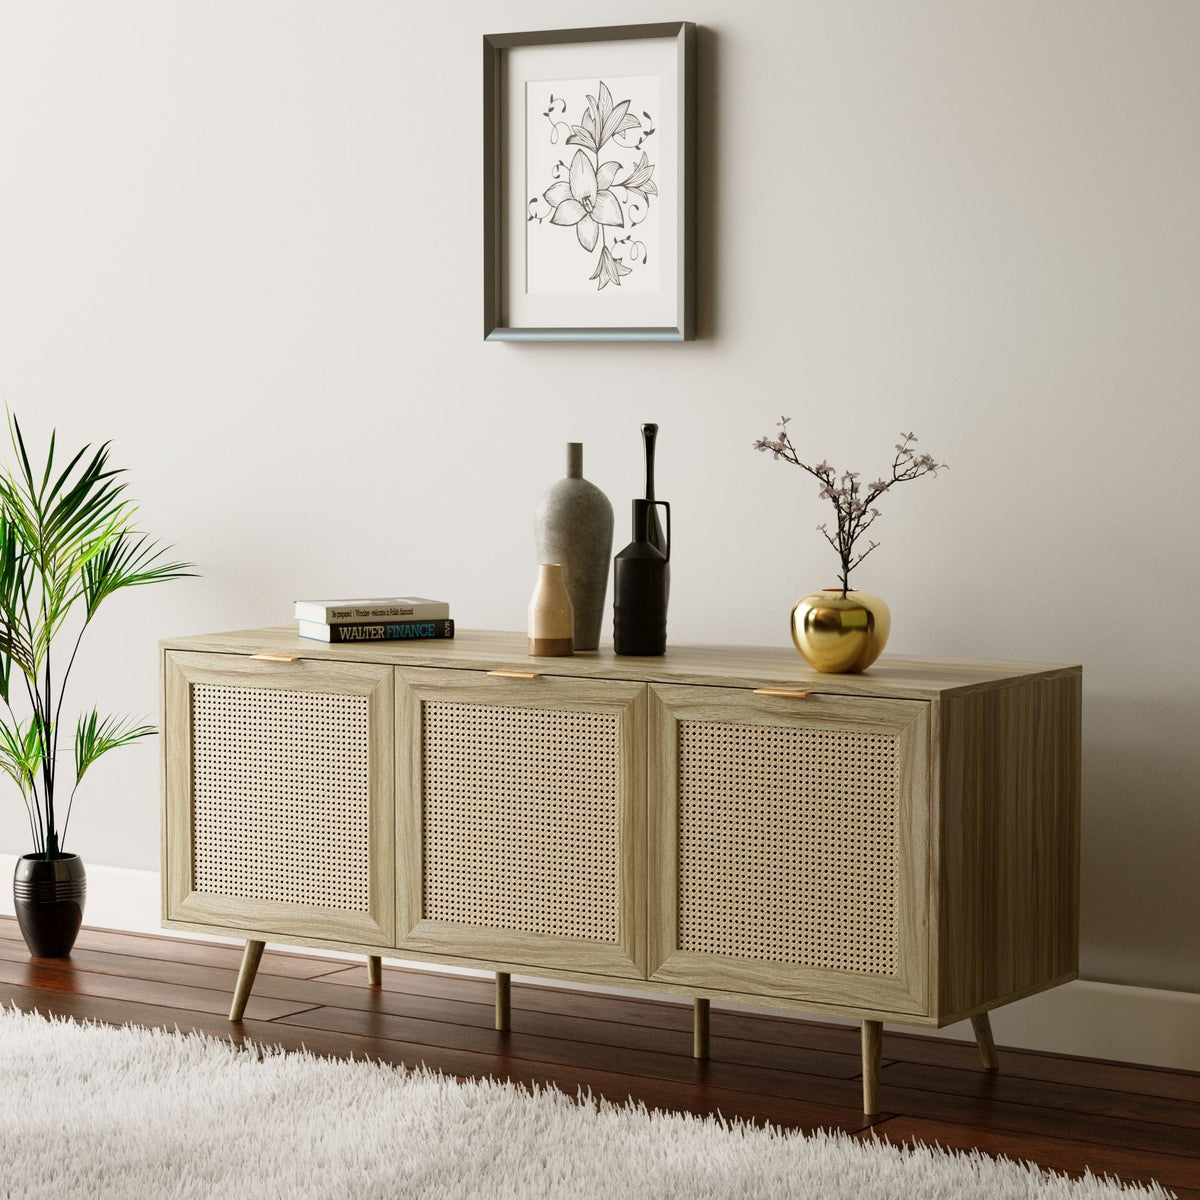 Rian Large 3 Door Sideboard - Natural With Real Cane Front Casa Maria Designs 